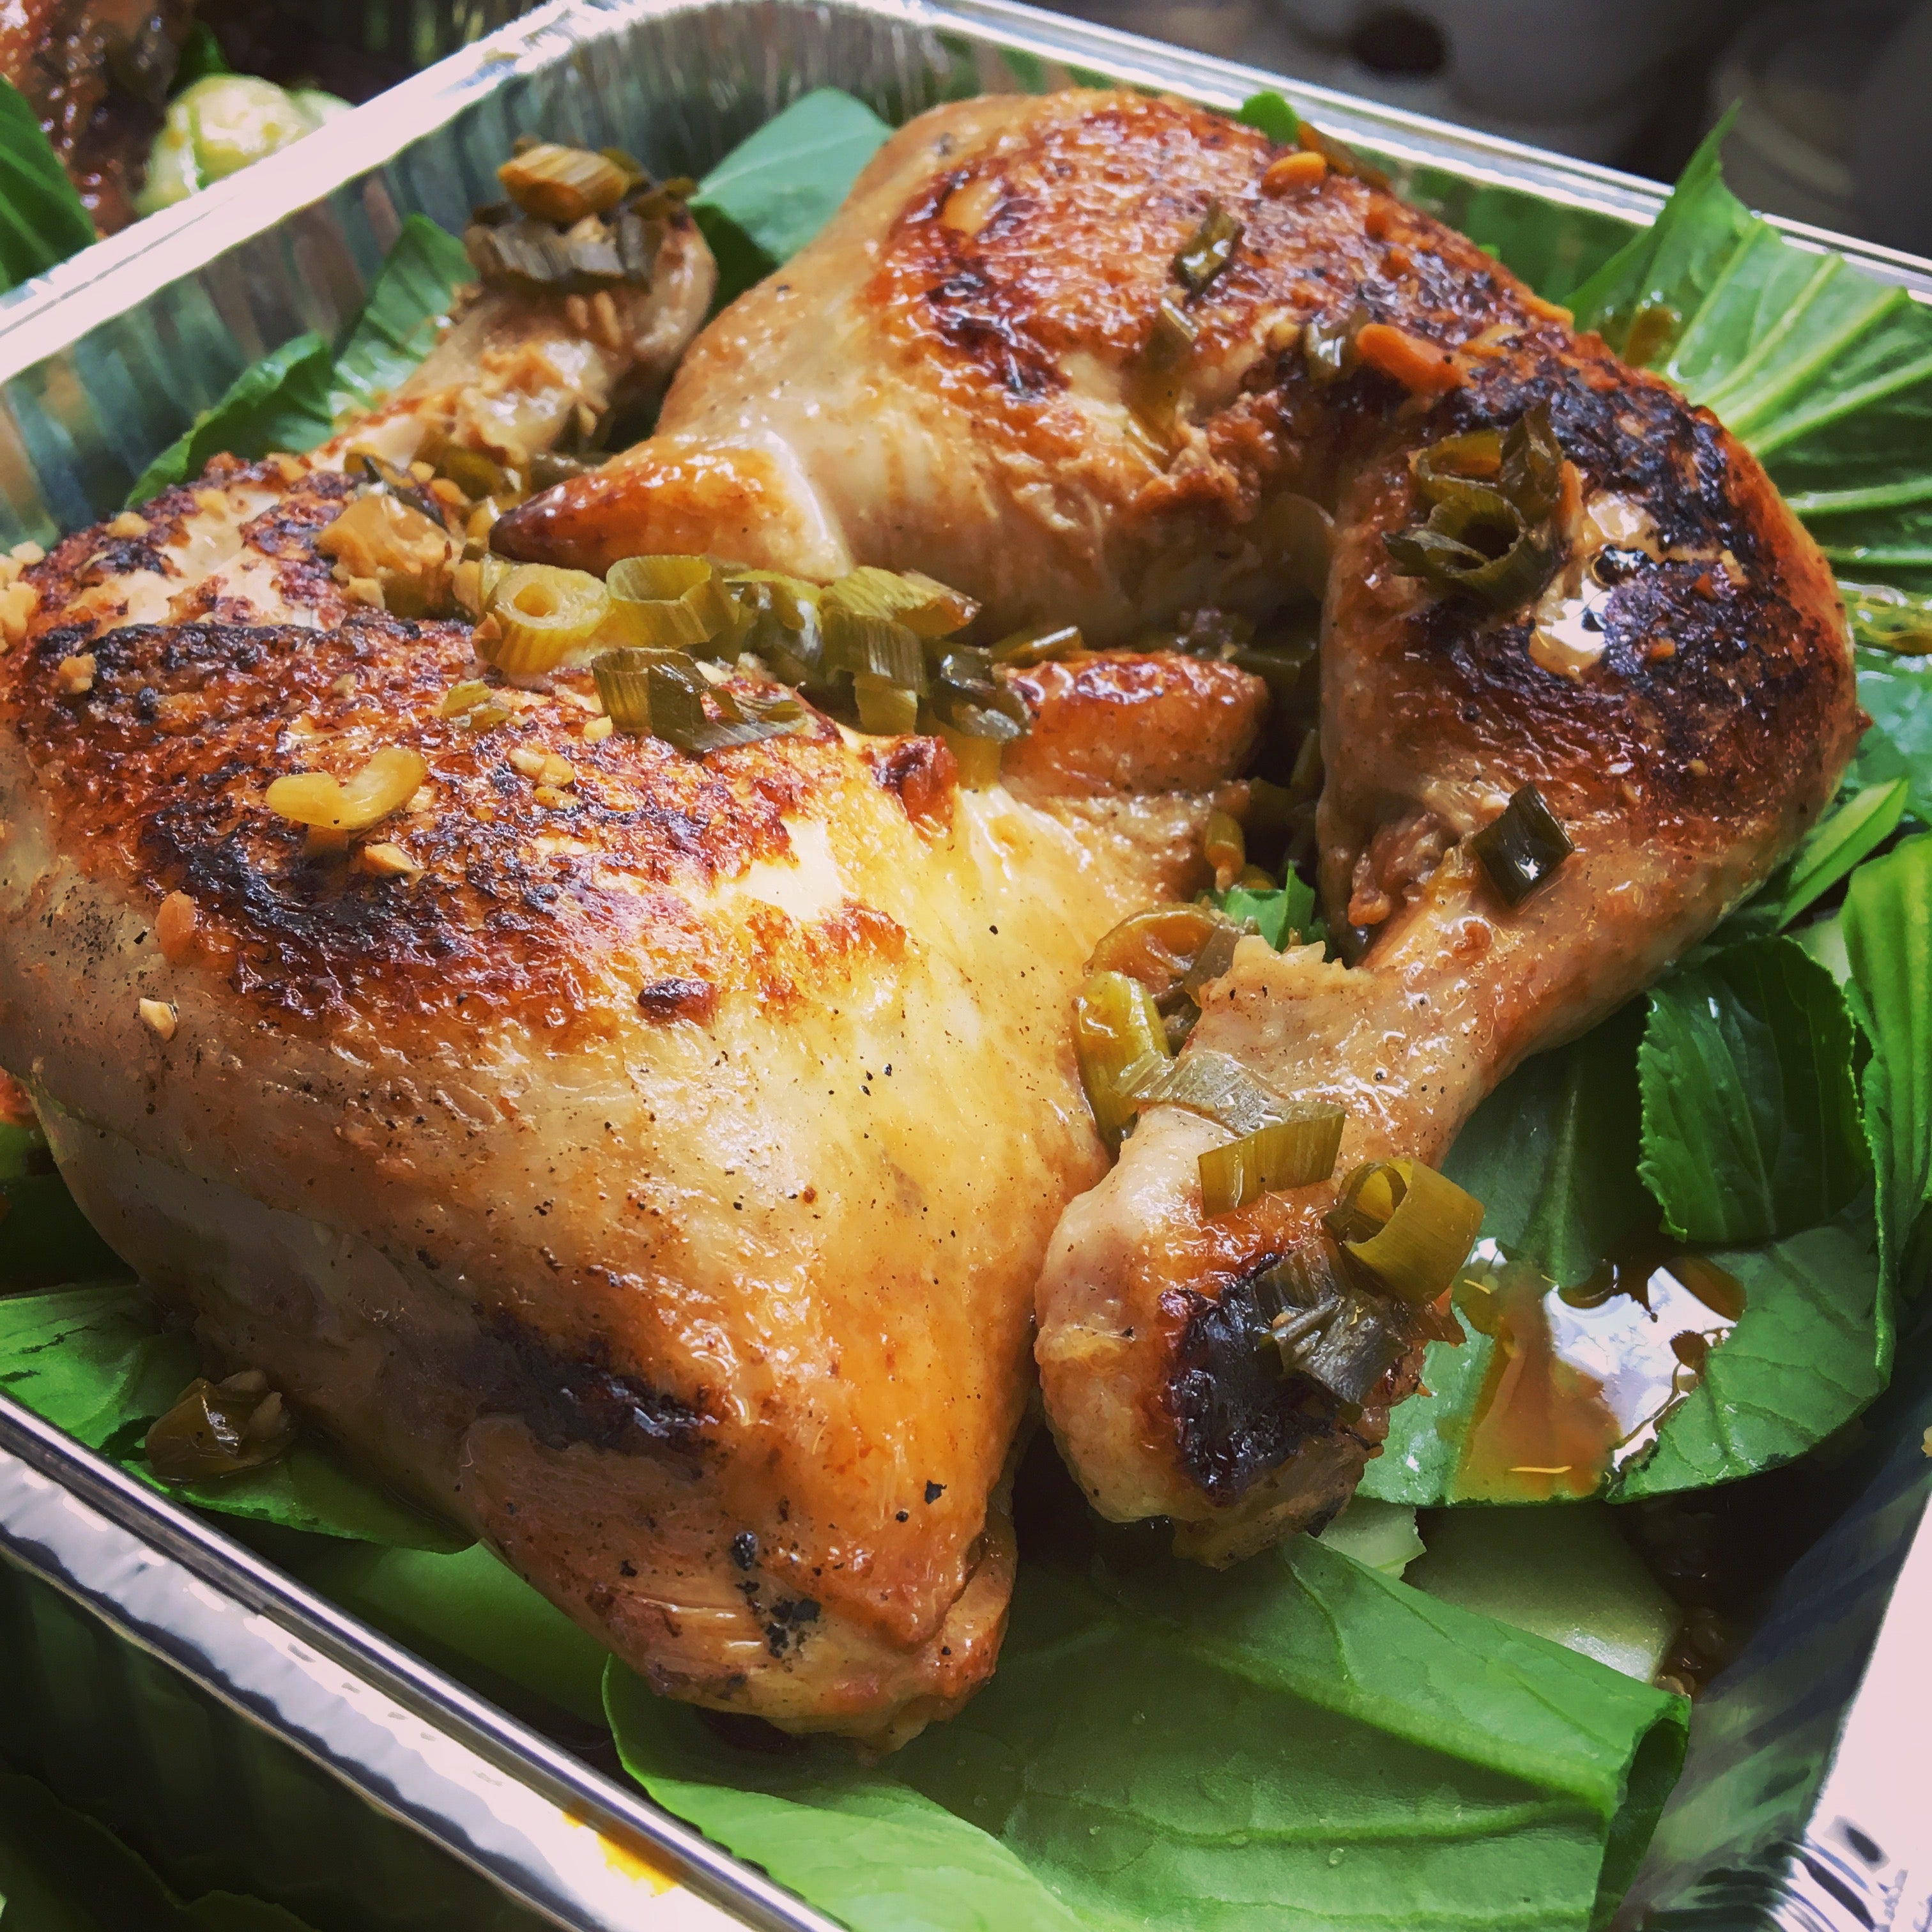 ready made home delivery meals featuring roast chicken in a tray